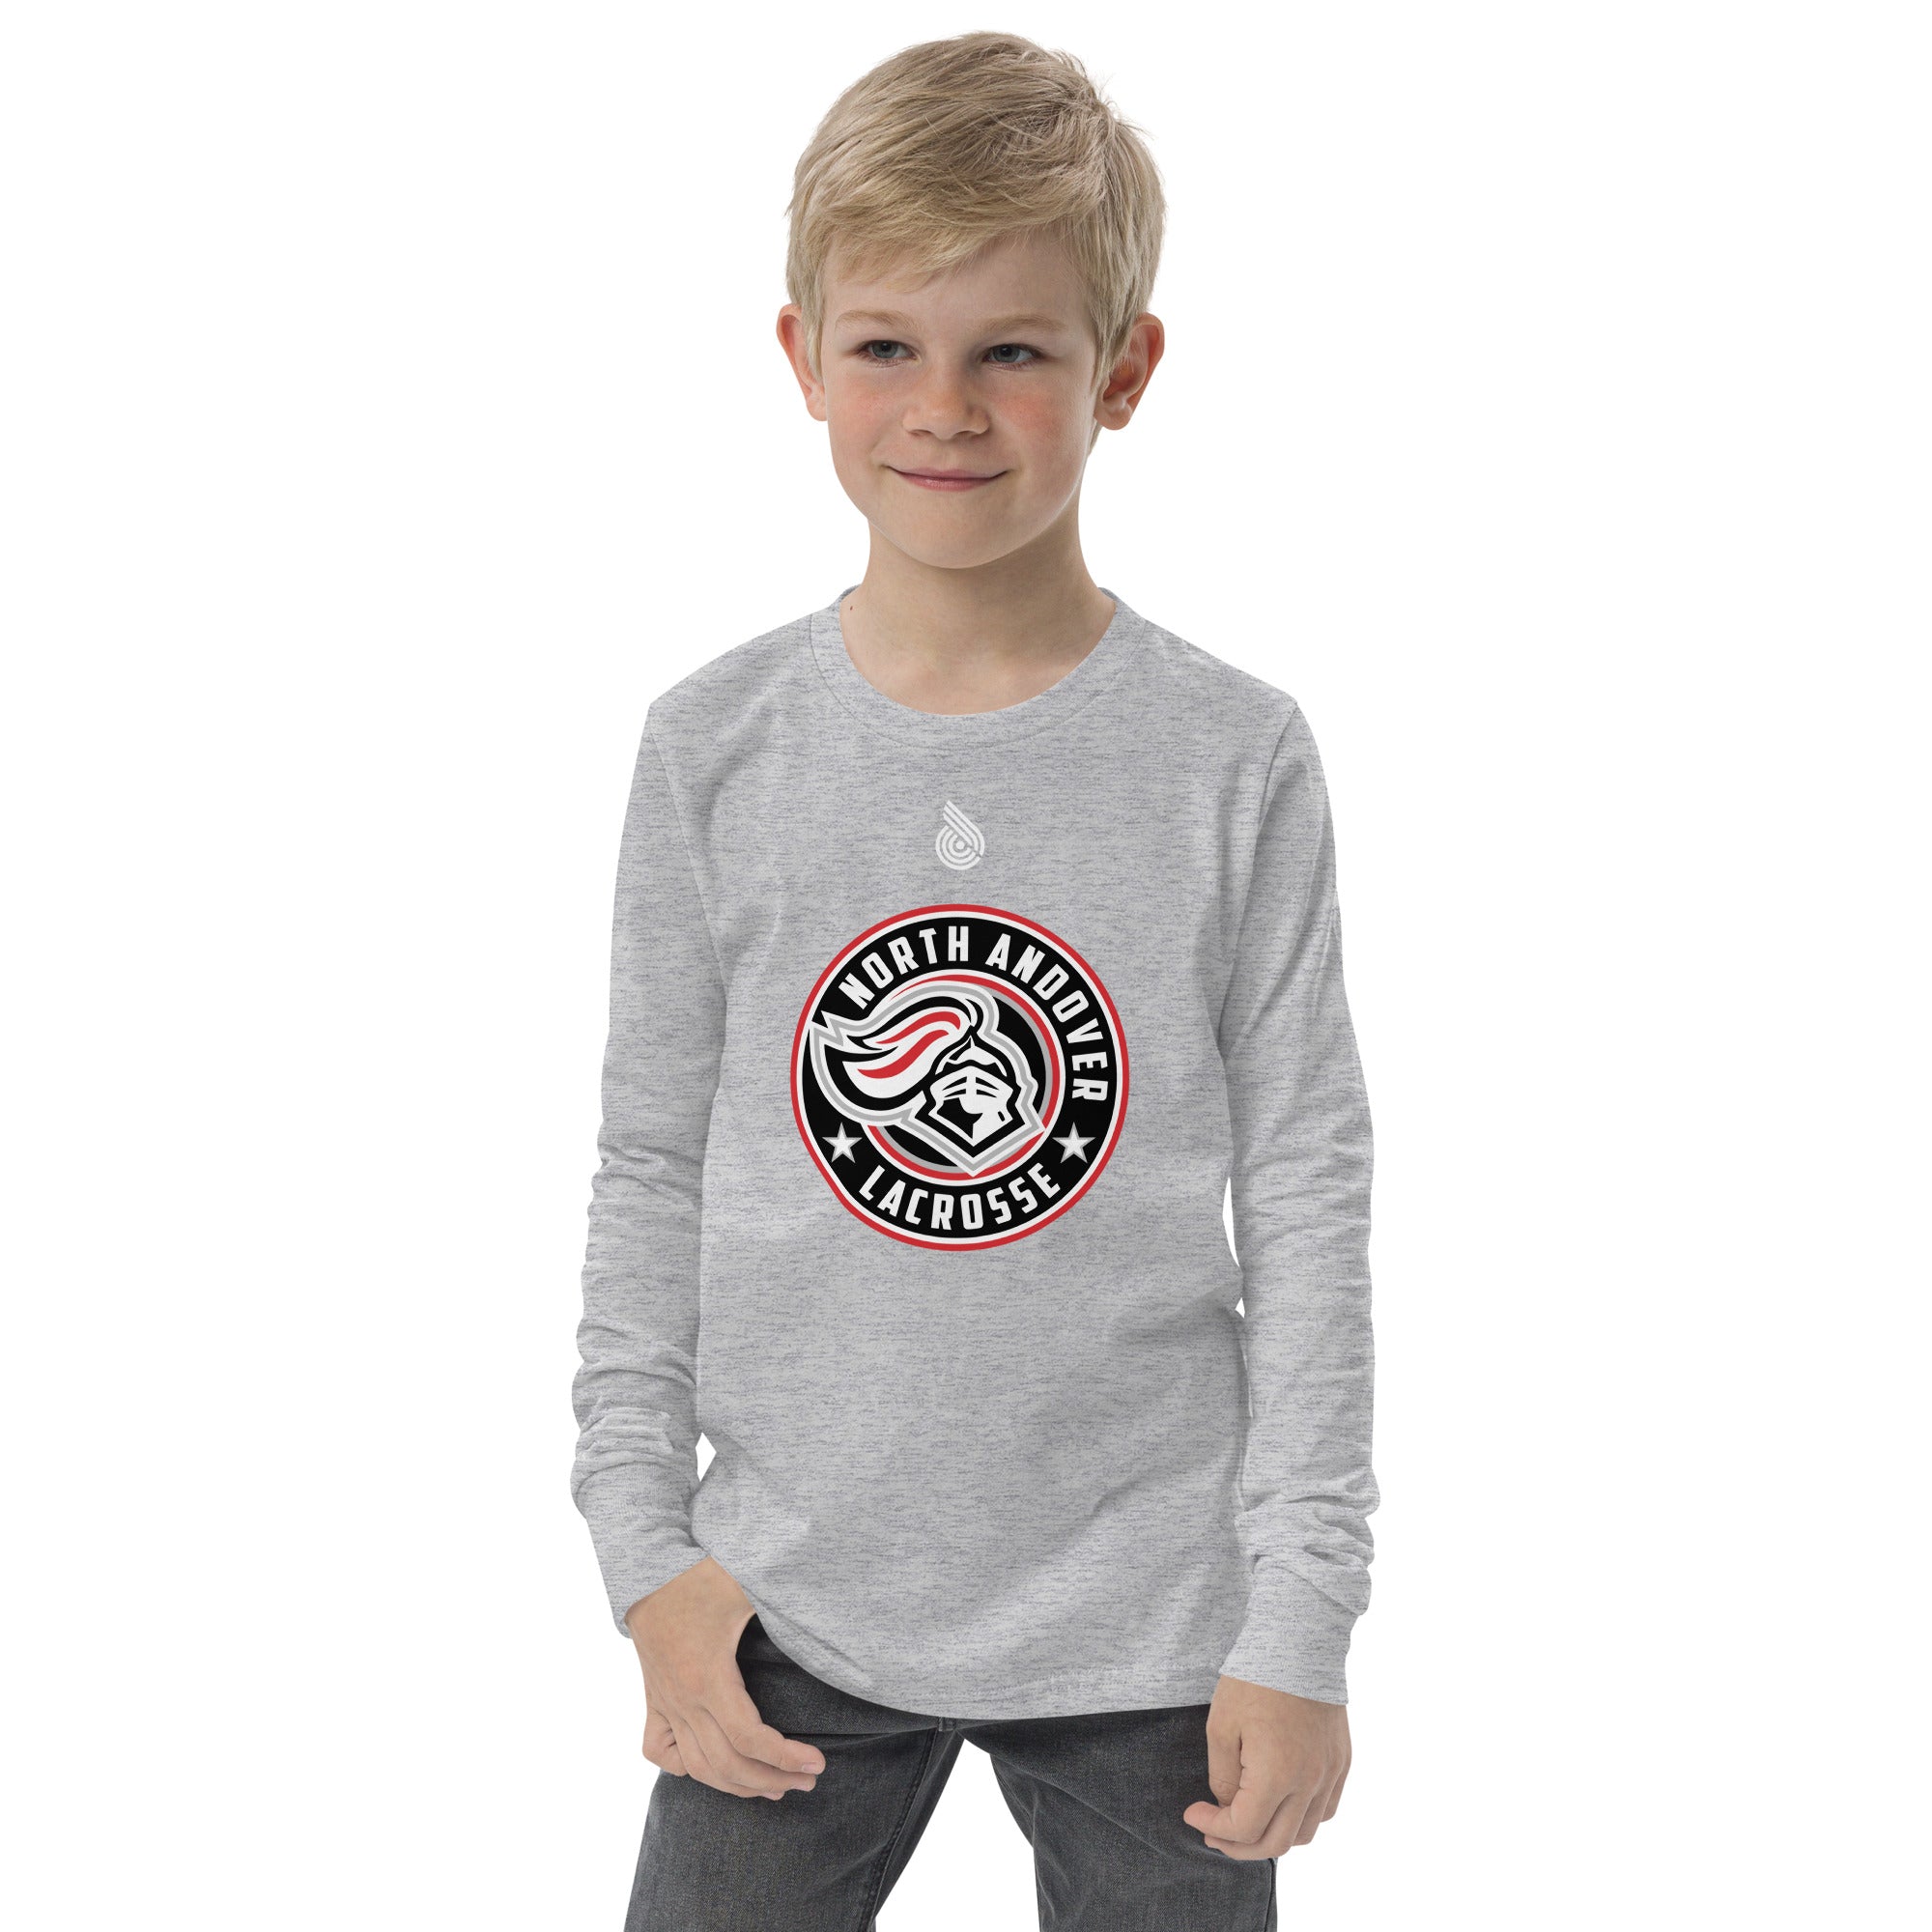 North Andover Youth long sleeve tee